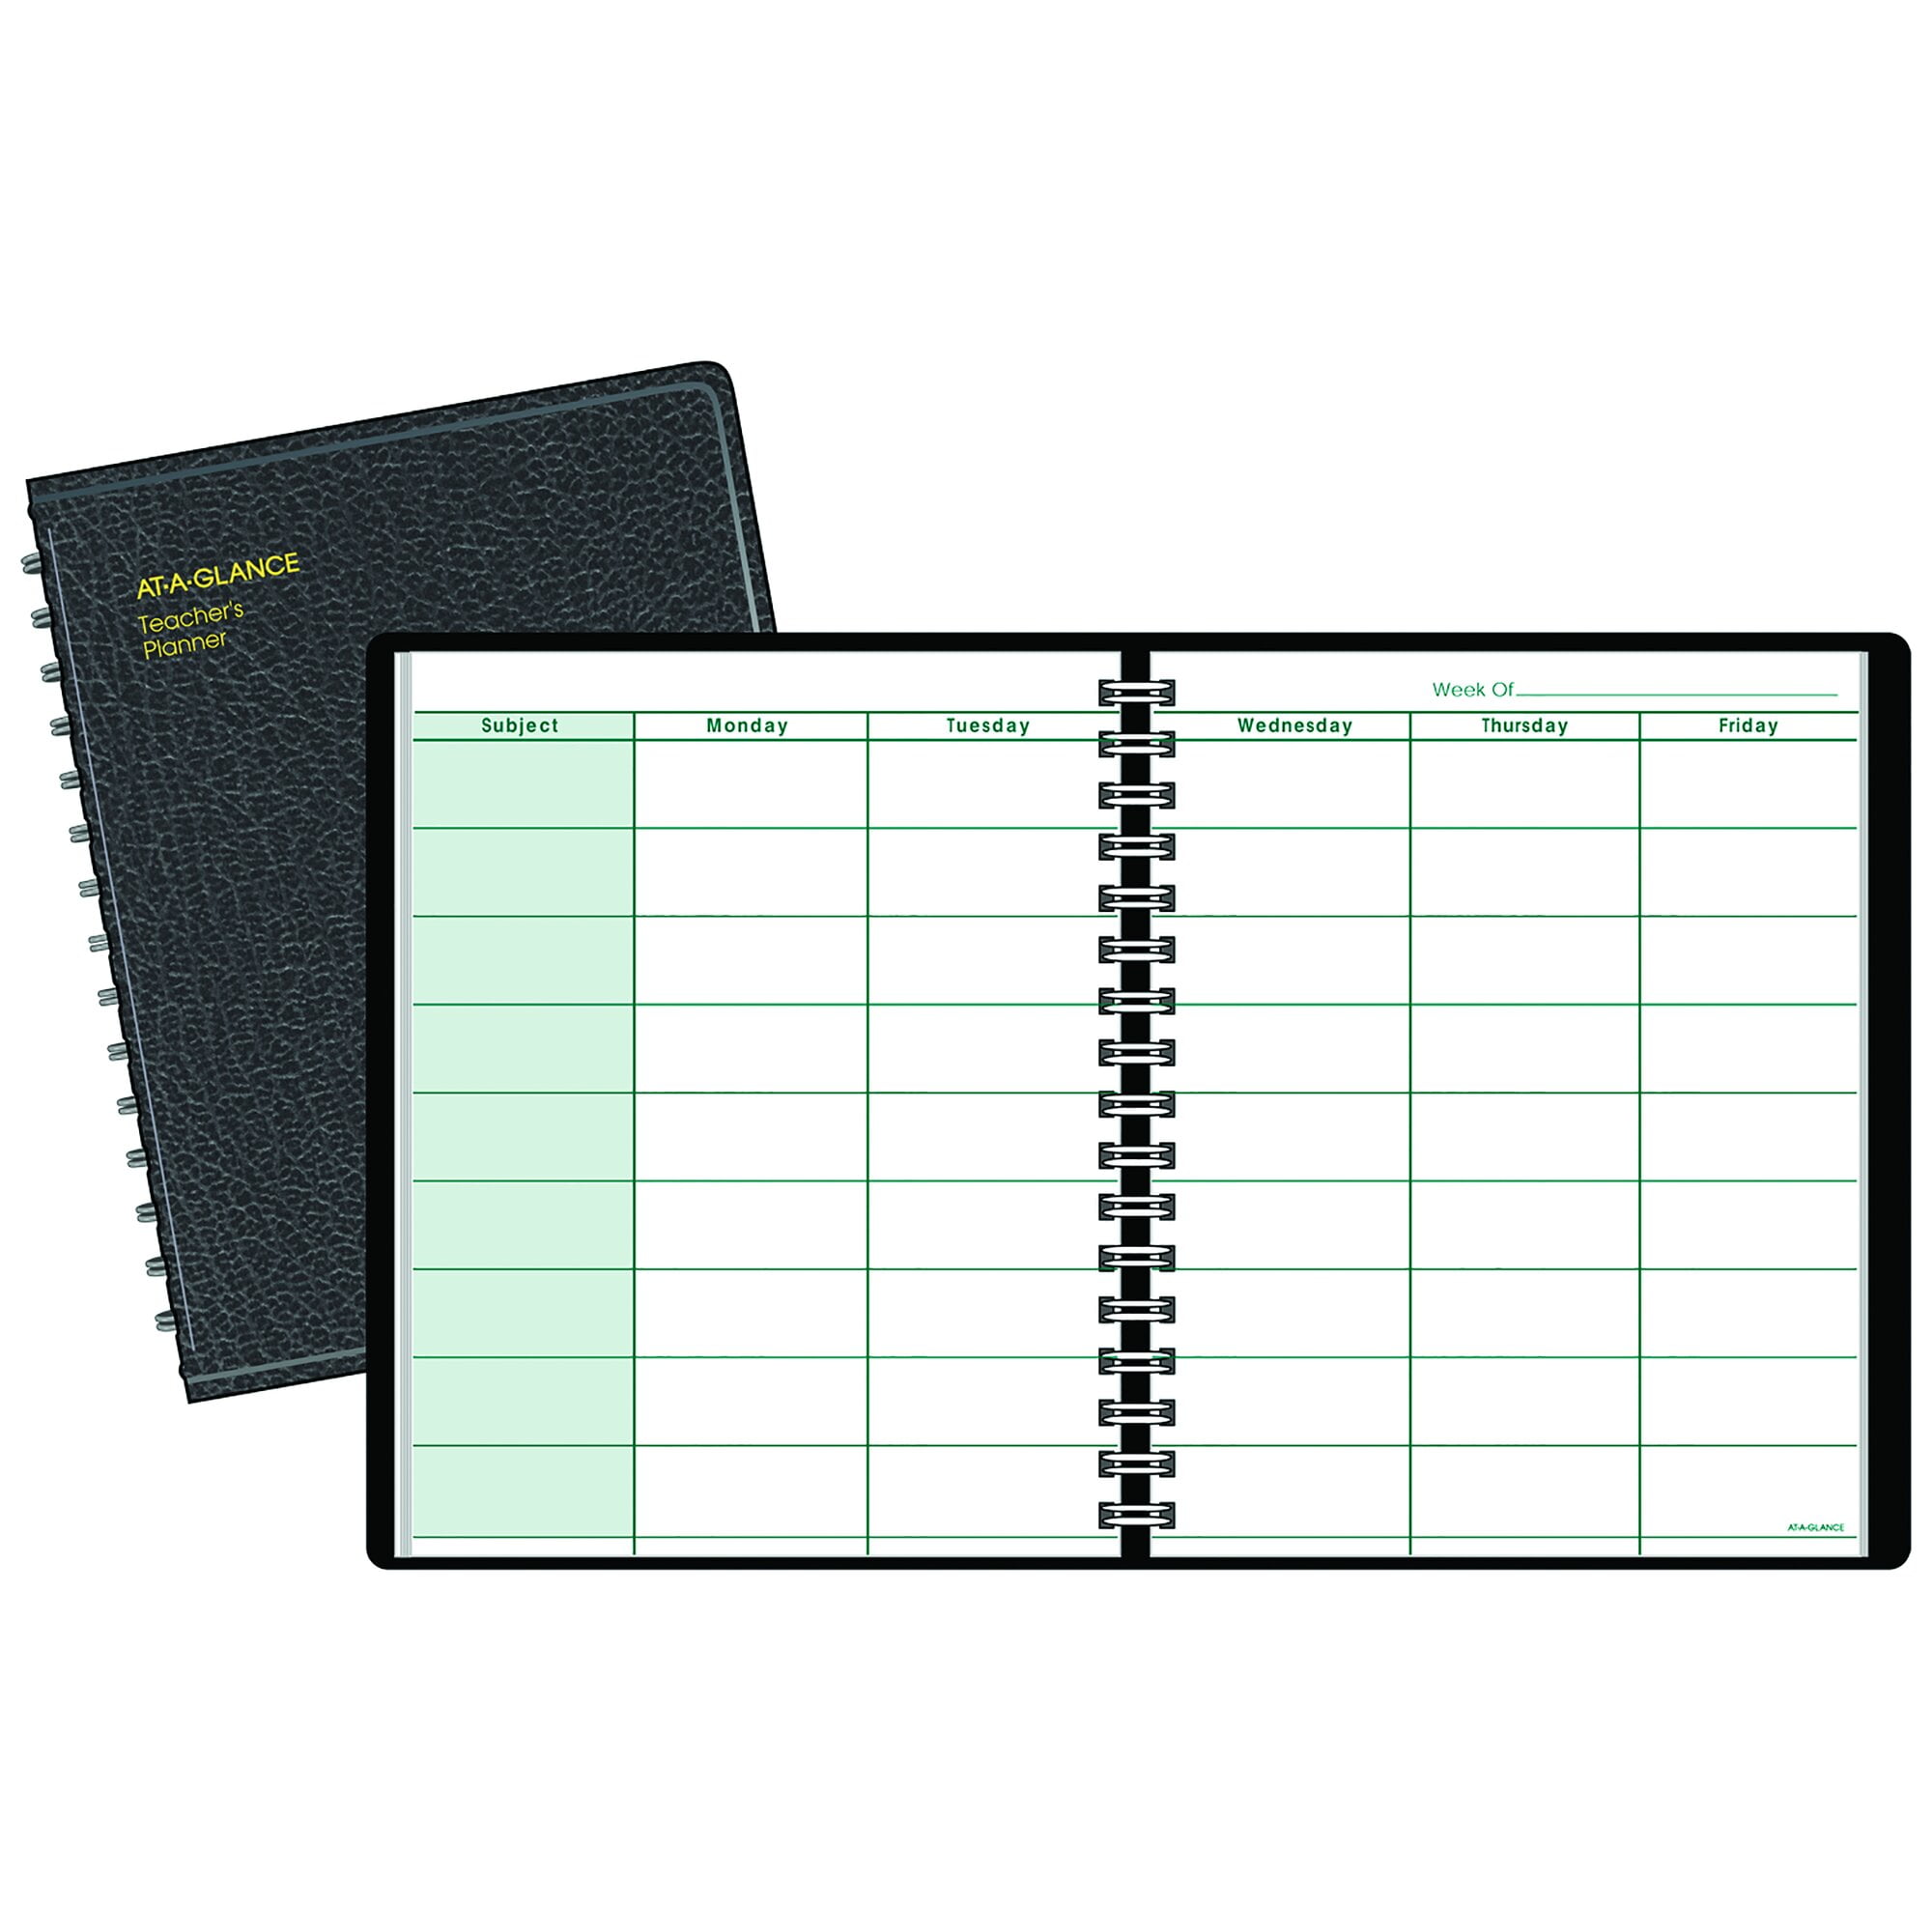 for School 9 x 11 7007405 AT-A-GLANCE Monthly Planner Black Teacher Student Academic Planner 2021-2022 Large 